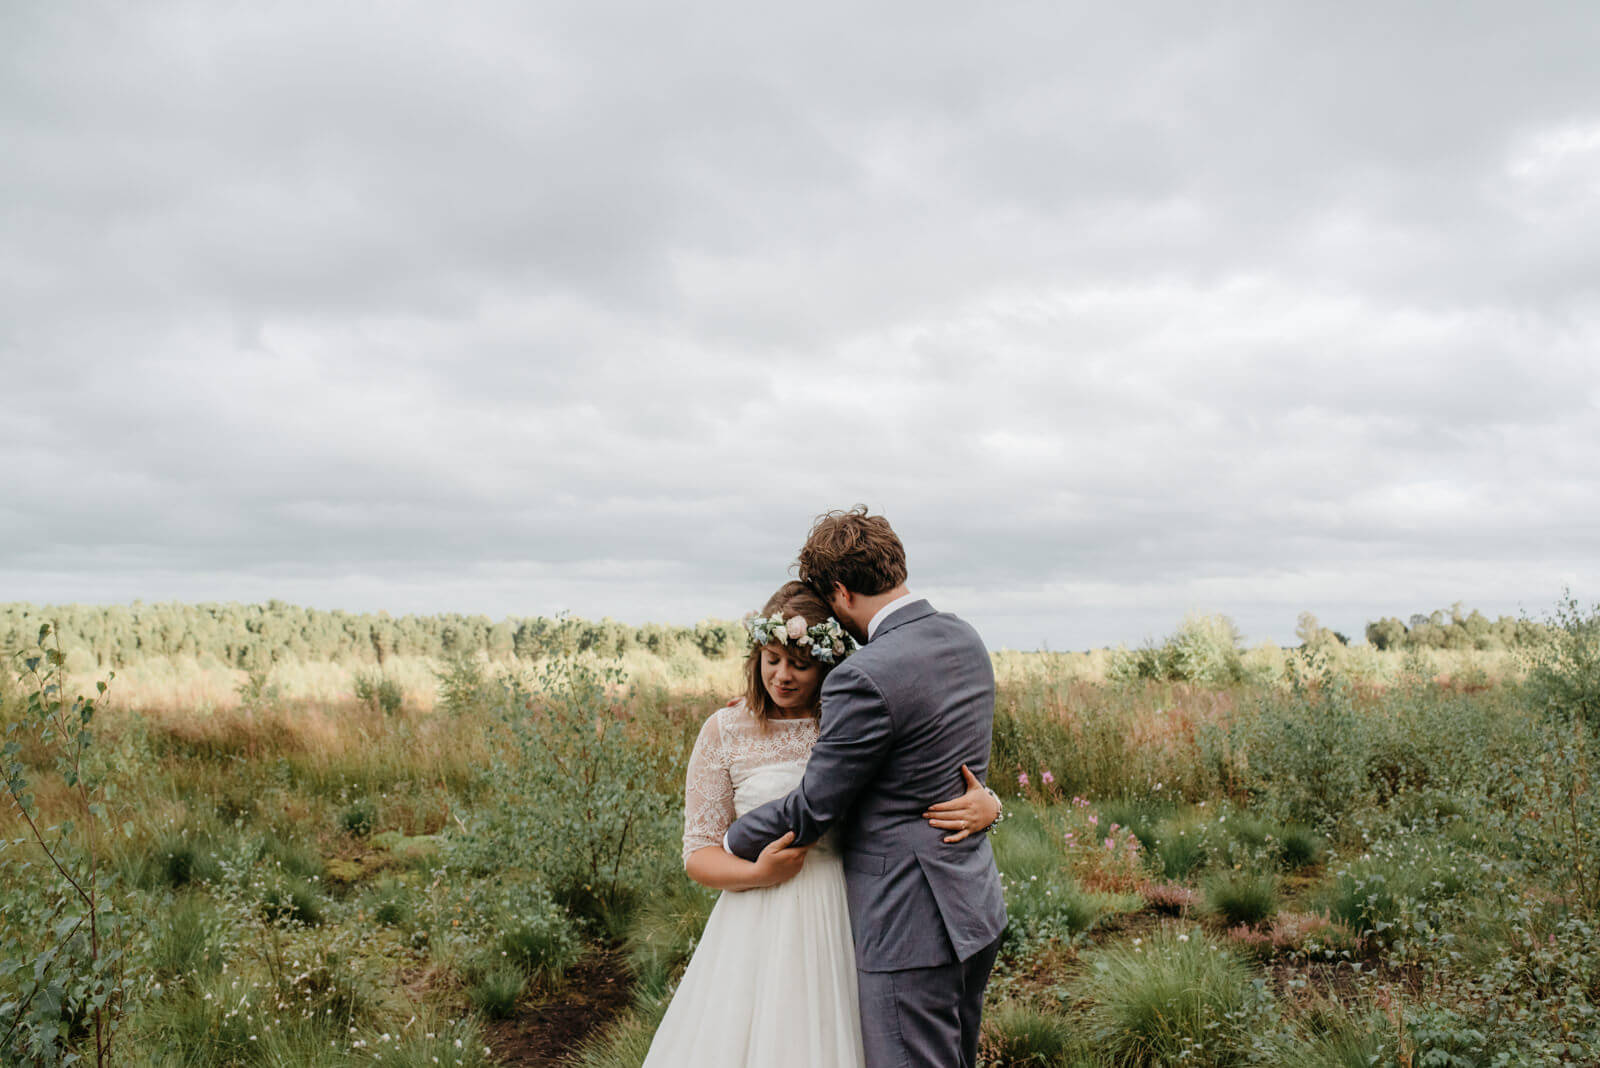 Relaxed portrait of bride and groom in beautiful landscape location at Shropshire mosses